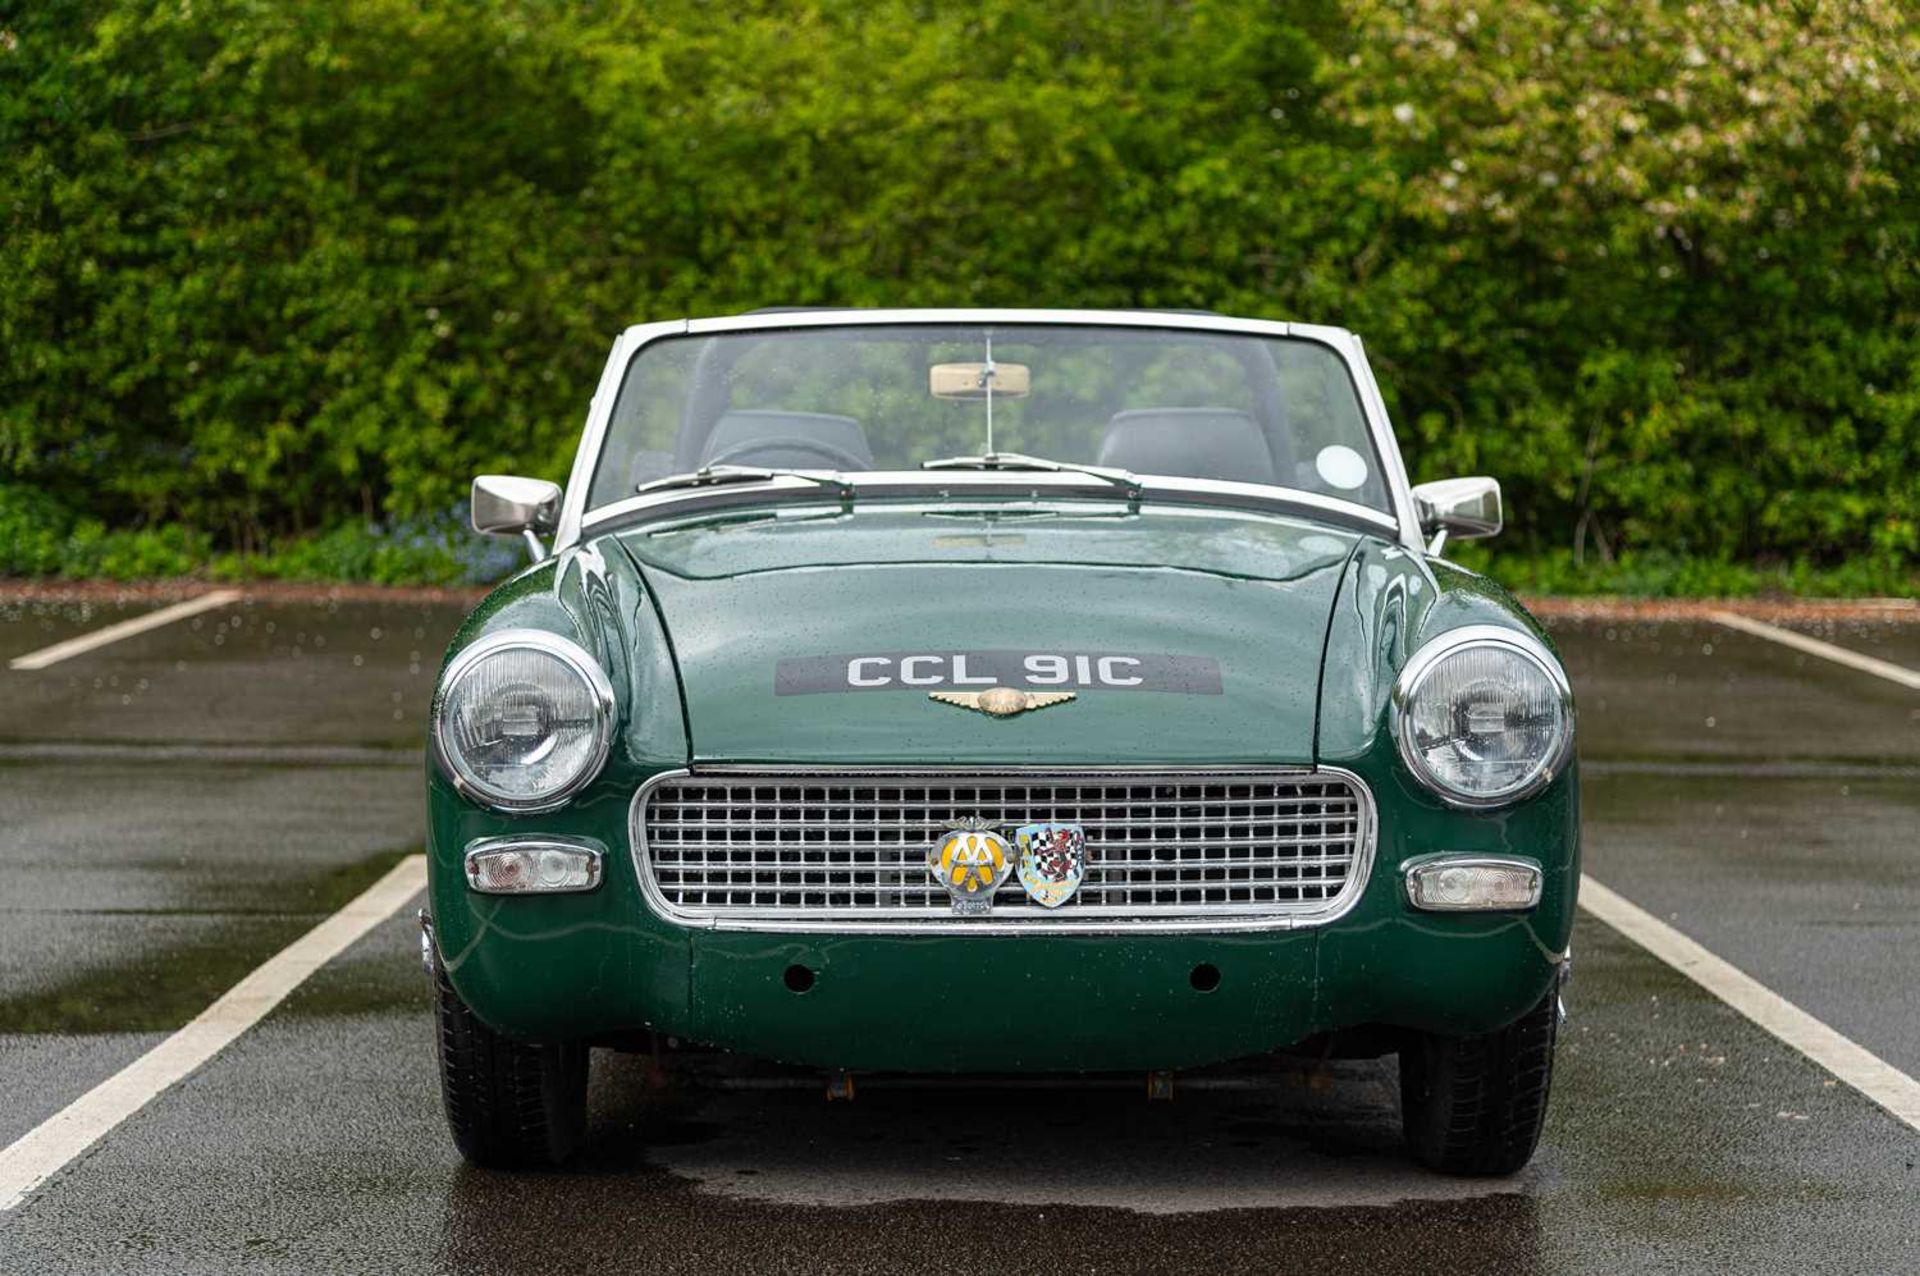 1965 Austin-Healey Sprite Formerly the property of British Formula One racing driver David Piper - Image 10 of 71